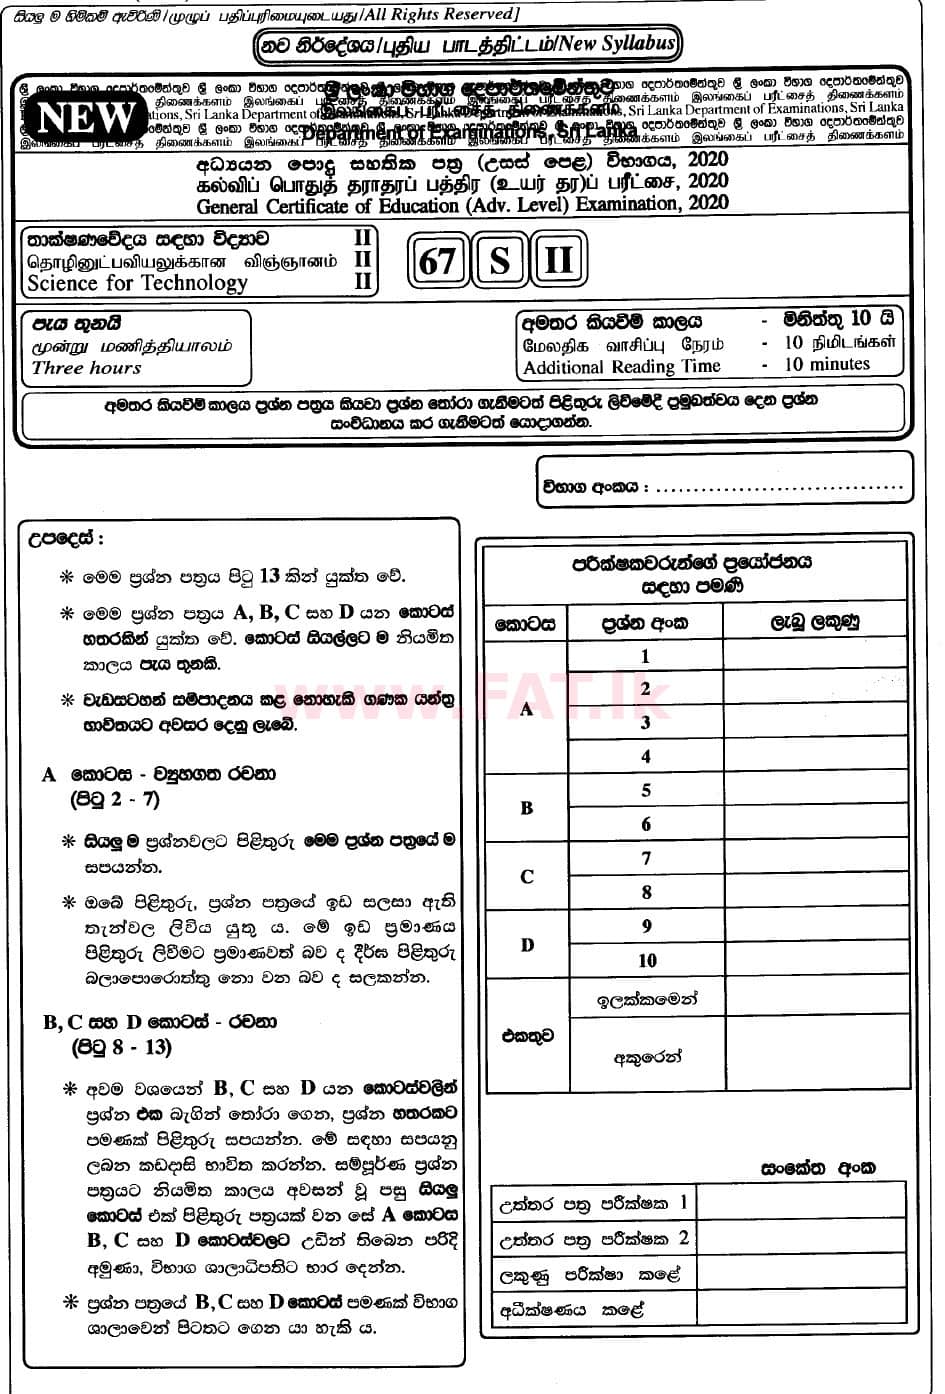 National Syllabus : Advanced Level (A/L) Science for Technology - 2020 October - Paper II (New Syllabus) (සිංහල Medium) 0 1